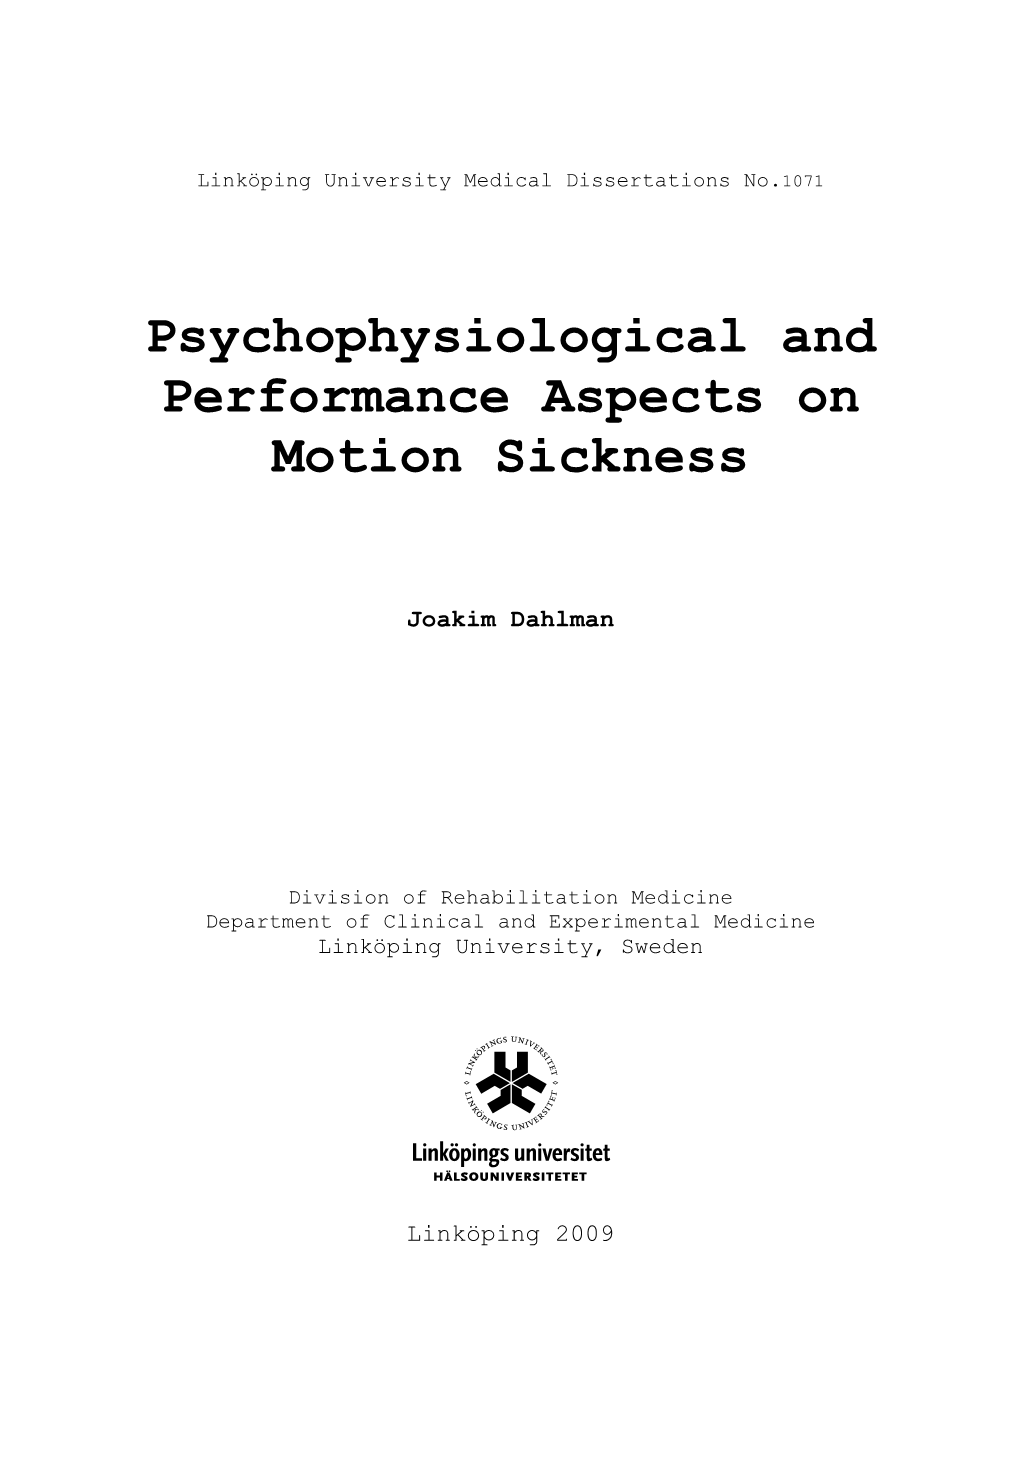 Psychophysiological and Performance Aspects on Motion Sickness